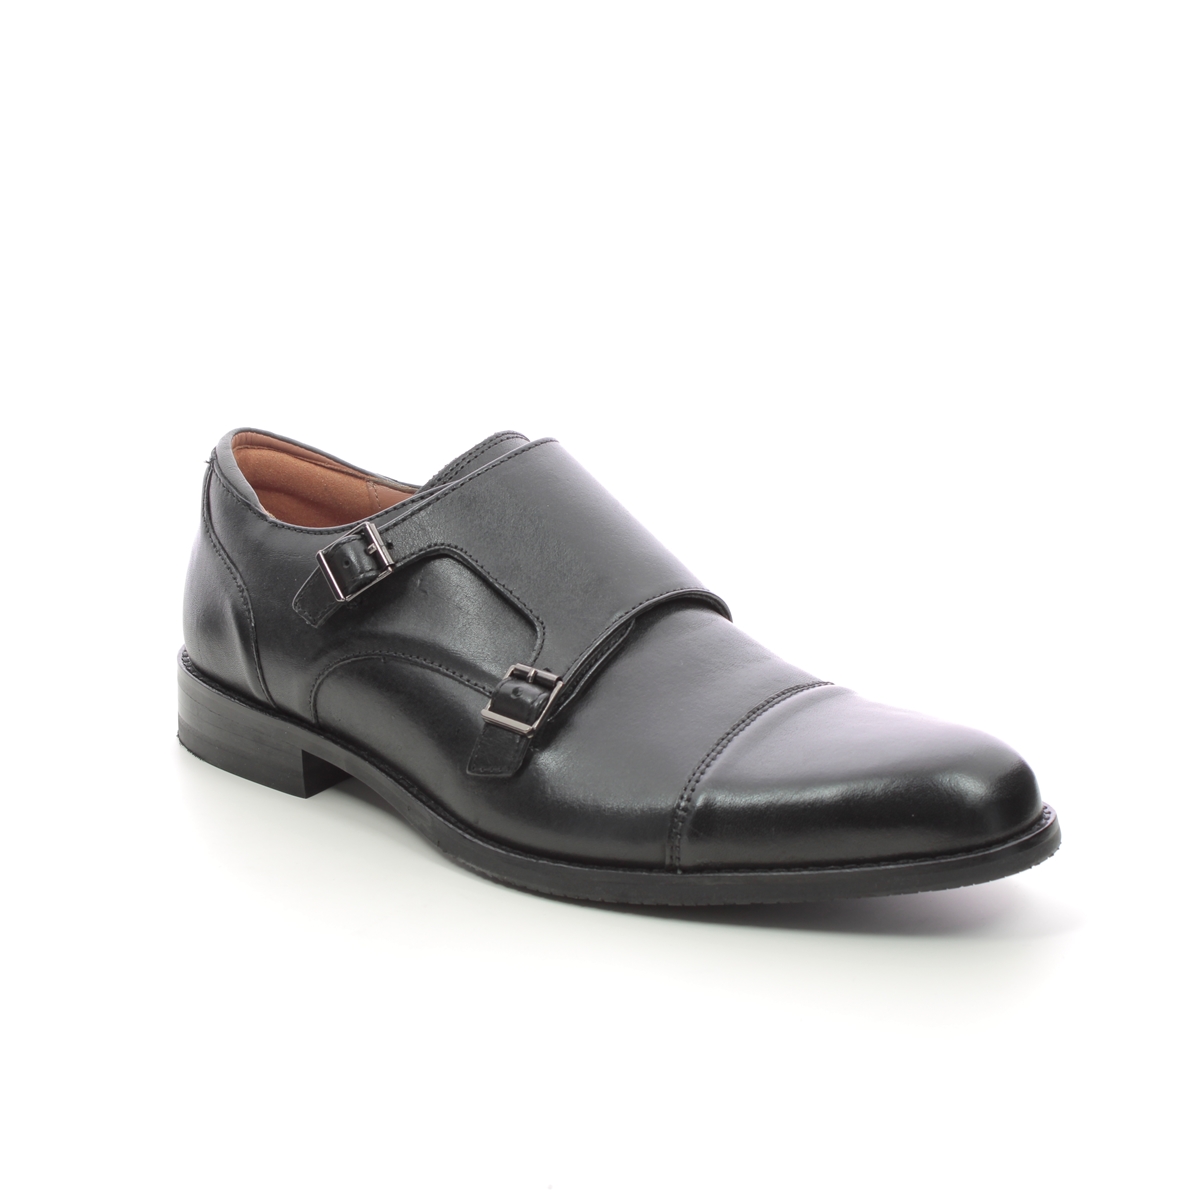 Clarks Craftarlo Monk Black Leather Mens Formal Shoes 724517G In Size 8.5 In Plain Black Leather G Width Fitting